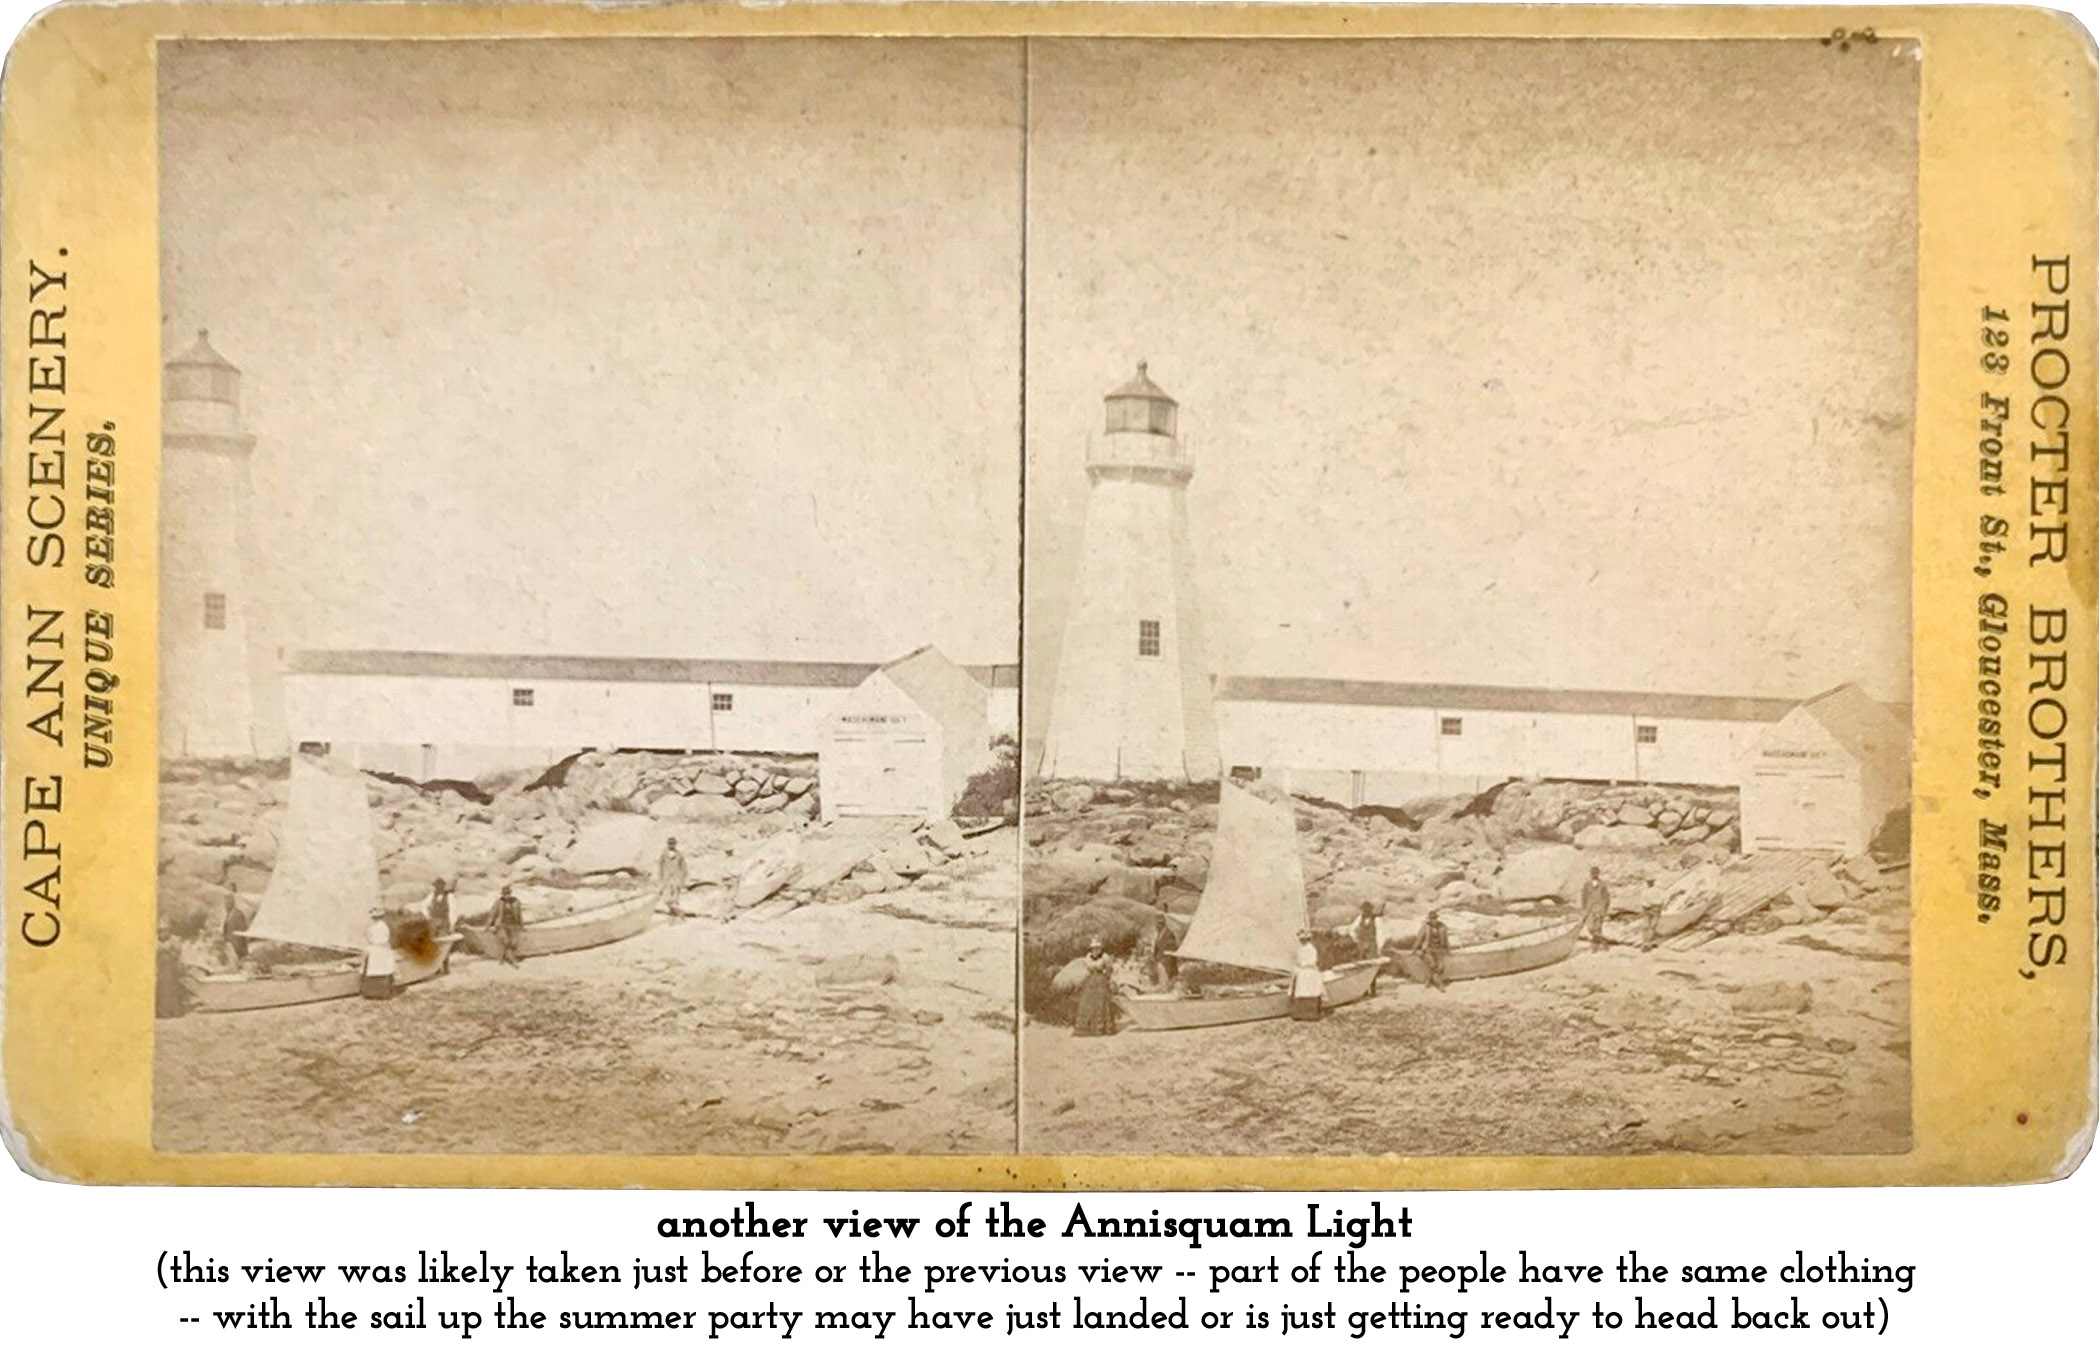 the Annisquam Light and sailing party